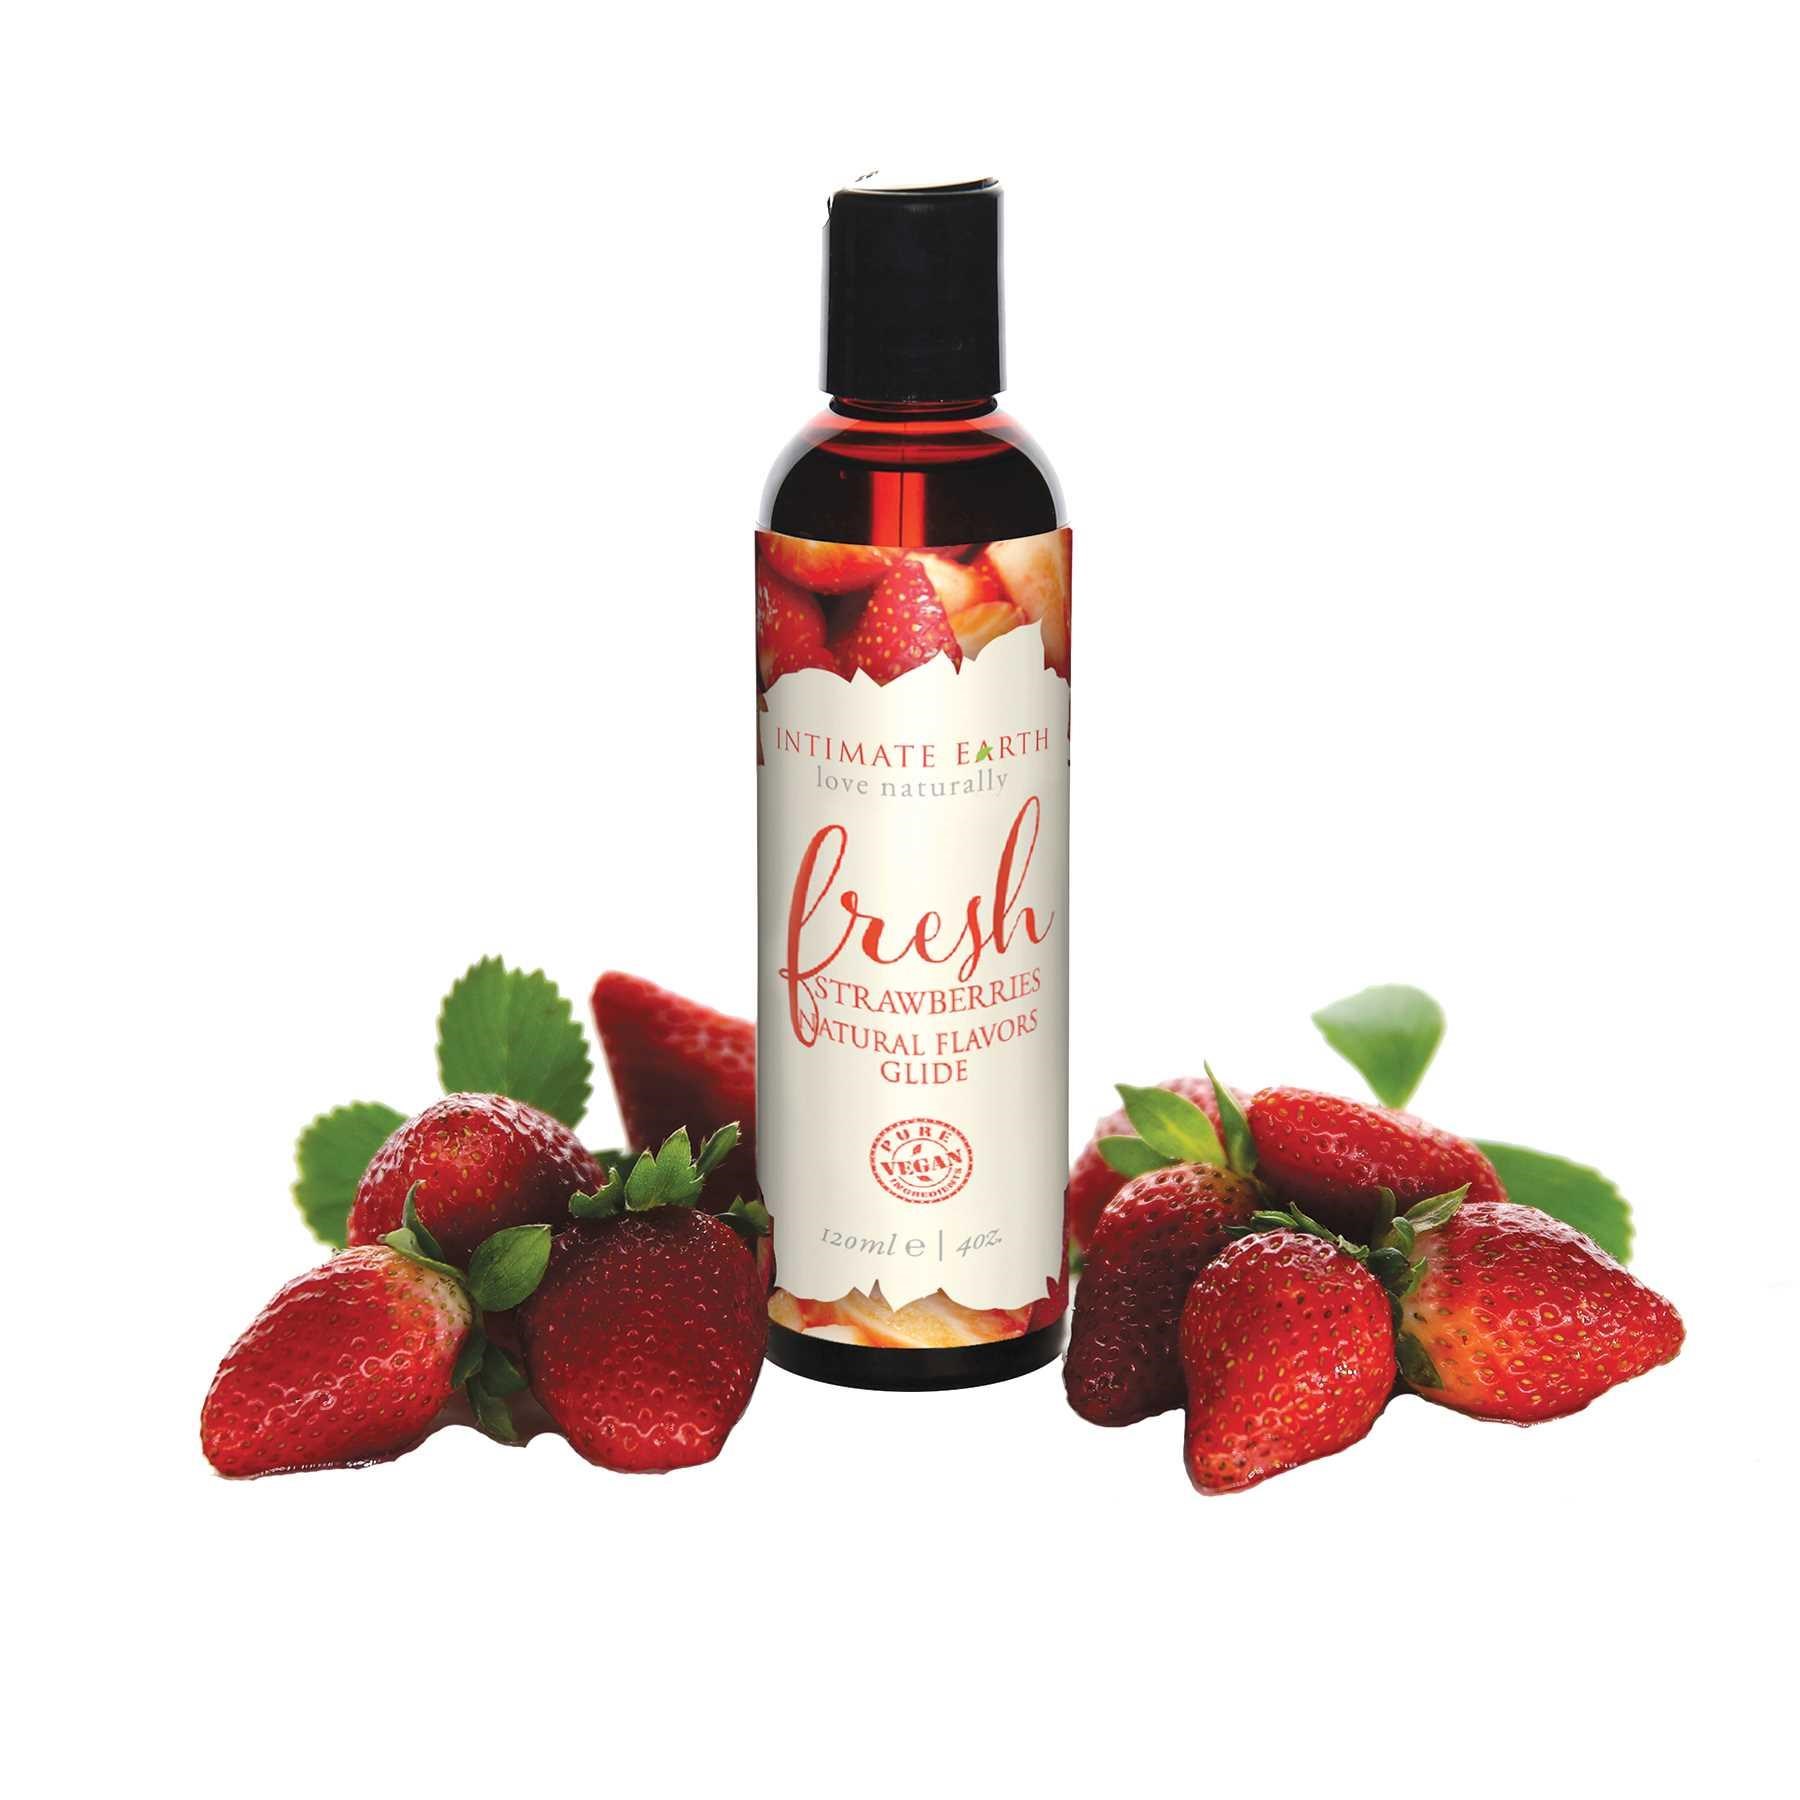 Intimate Earth Natural Flavor Glide Fresh Strawberries Mood